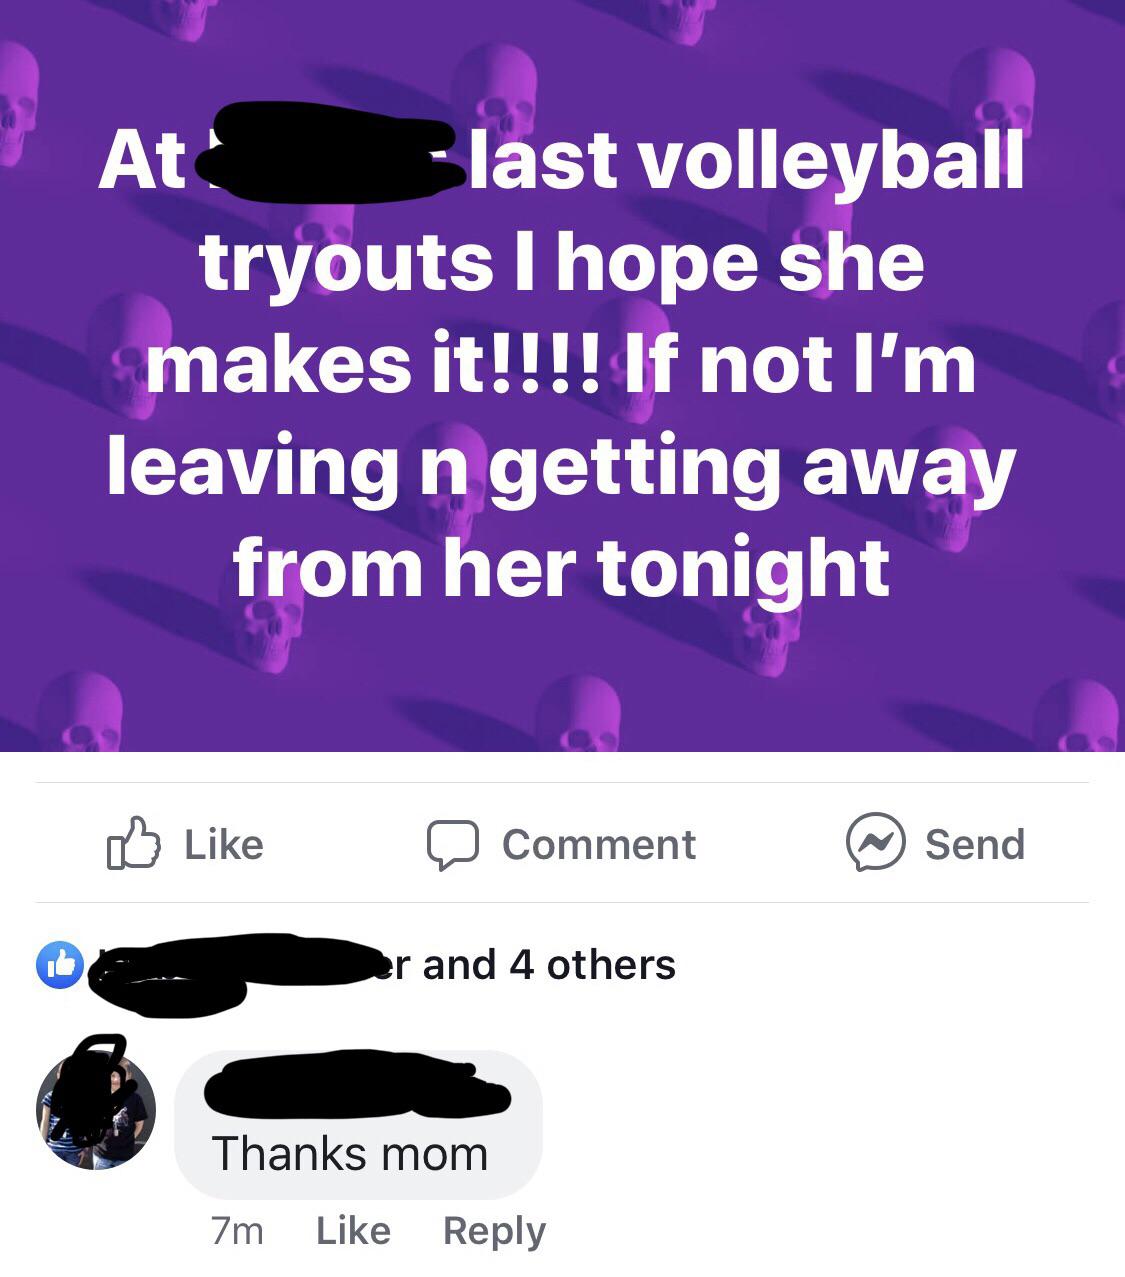 At last volleyball tryouts I hope she makes it!!!! If not l'm leaving n getting away from her tonight DComment @ Send er and 4 others Thanks mom 7m